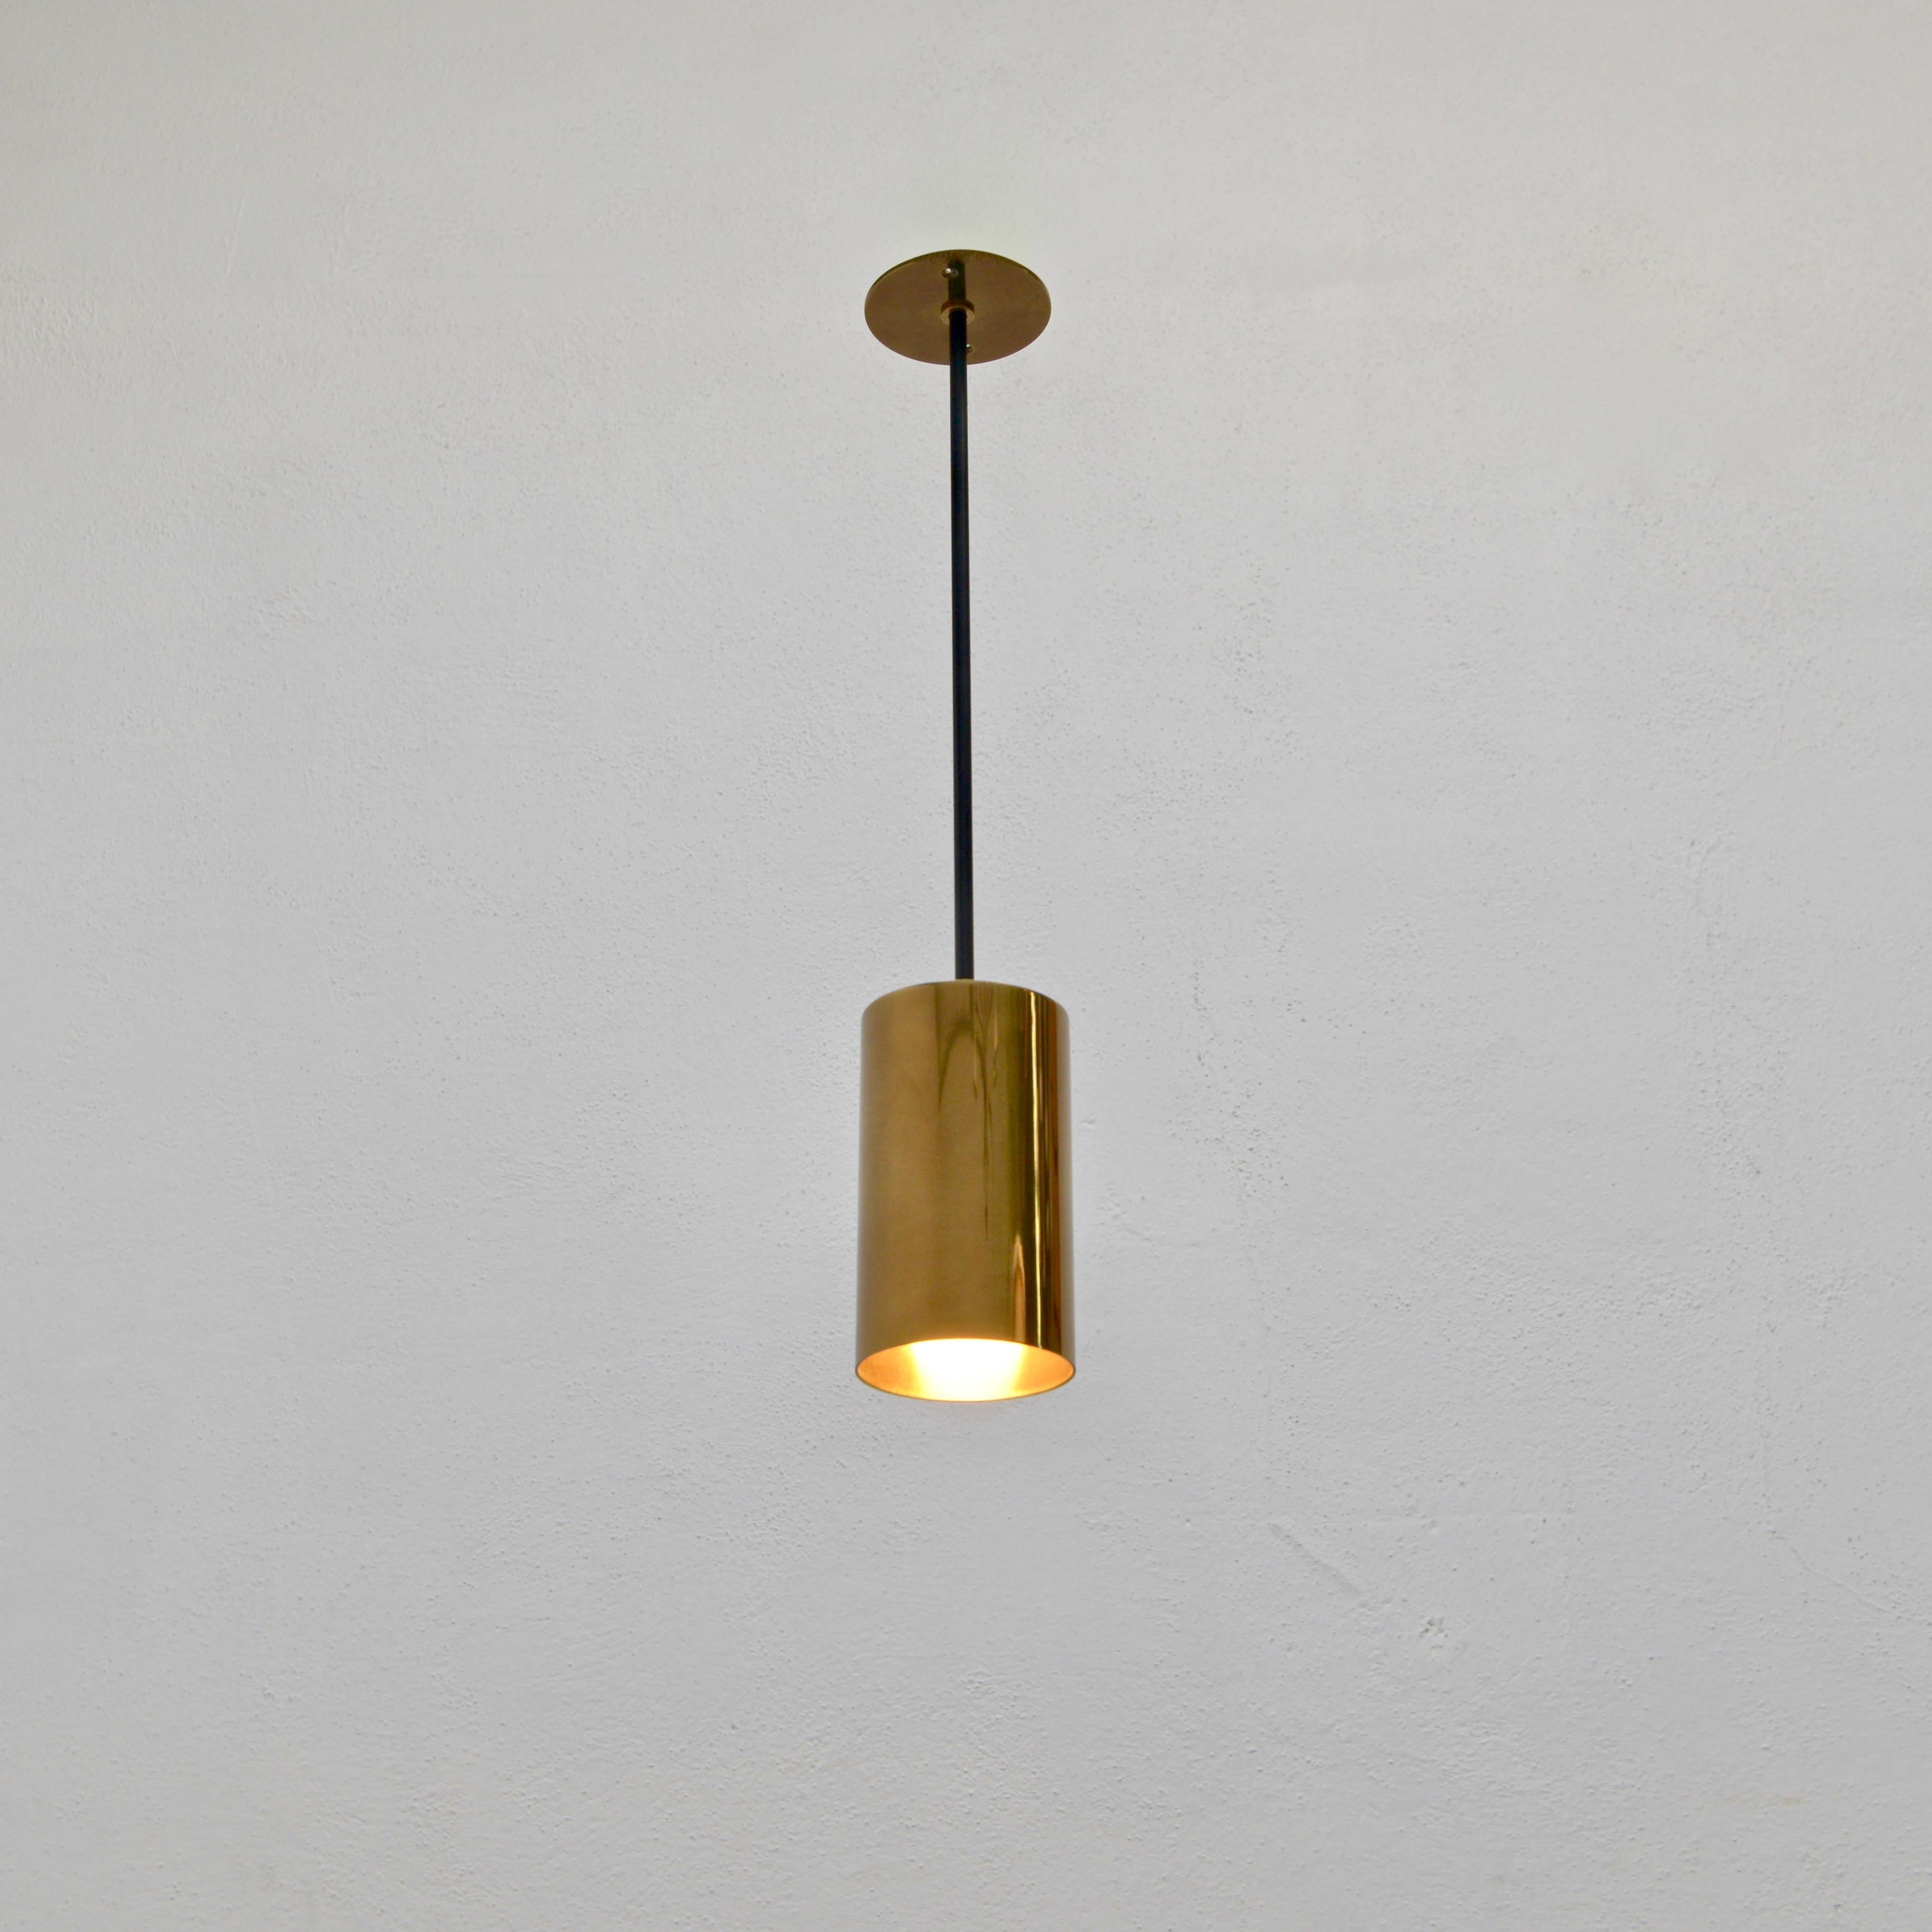 LUdown Cylinder Pendant In New Condition For Sale In Los Angeles, CA